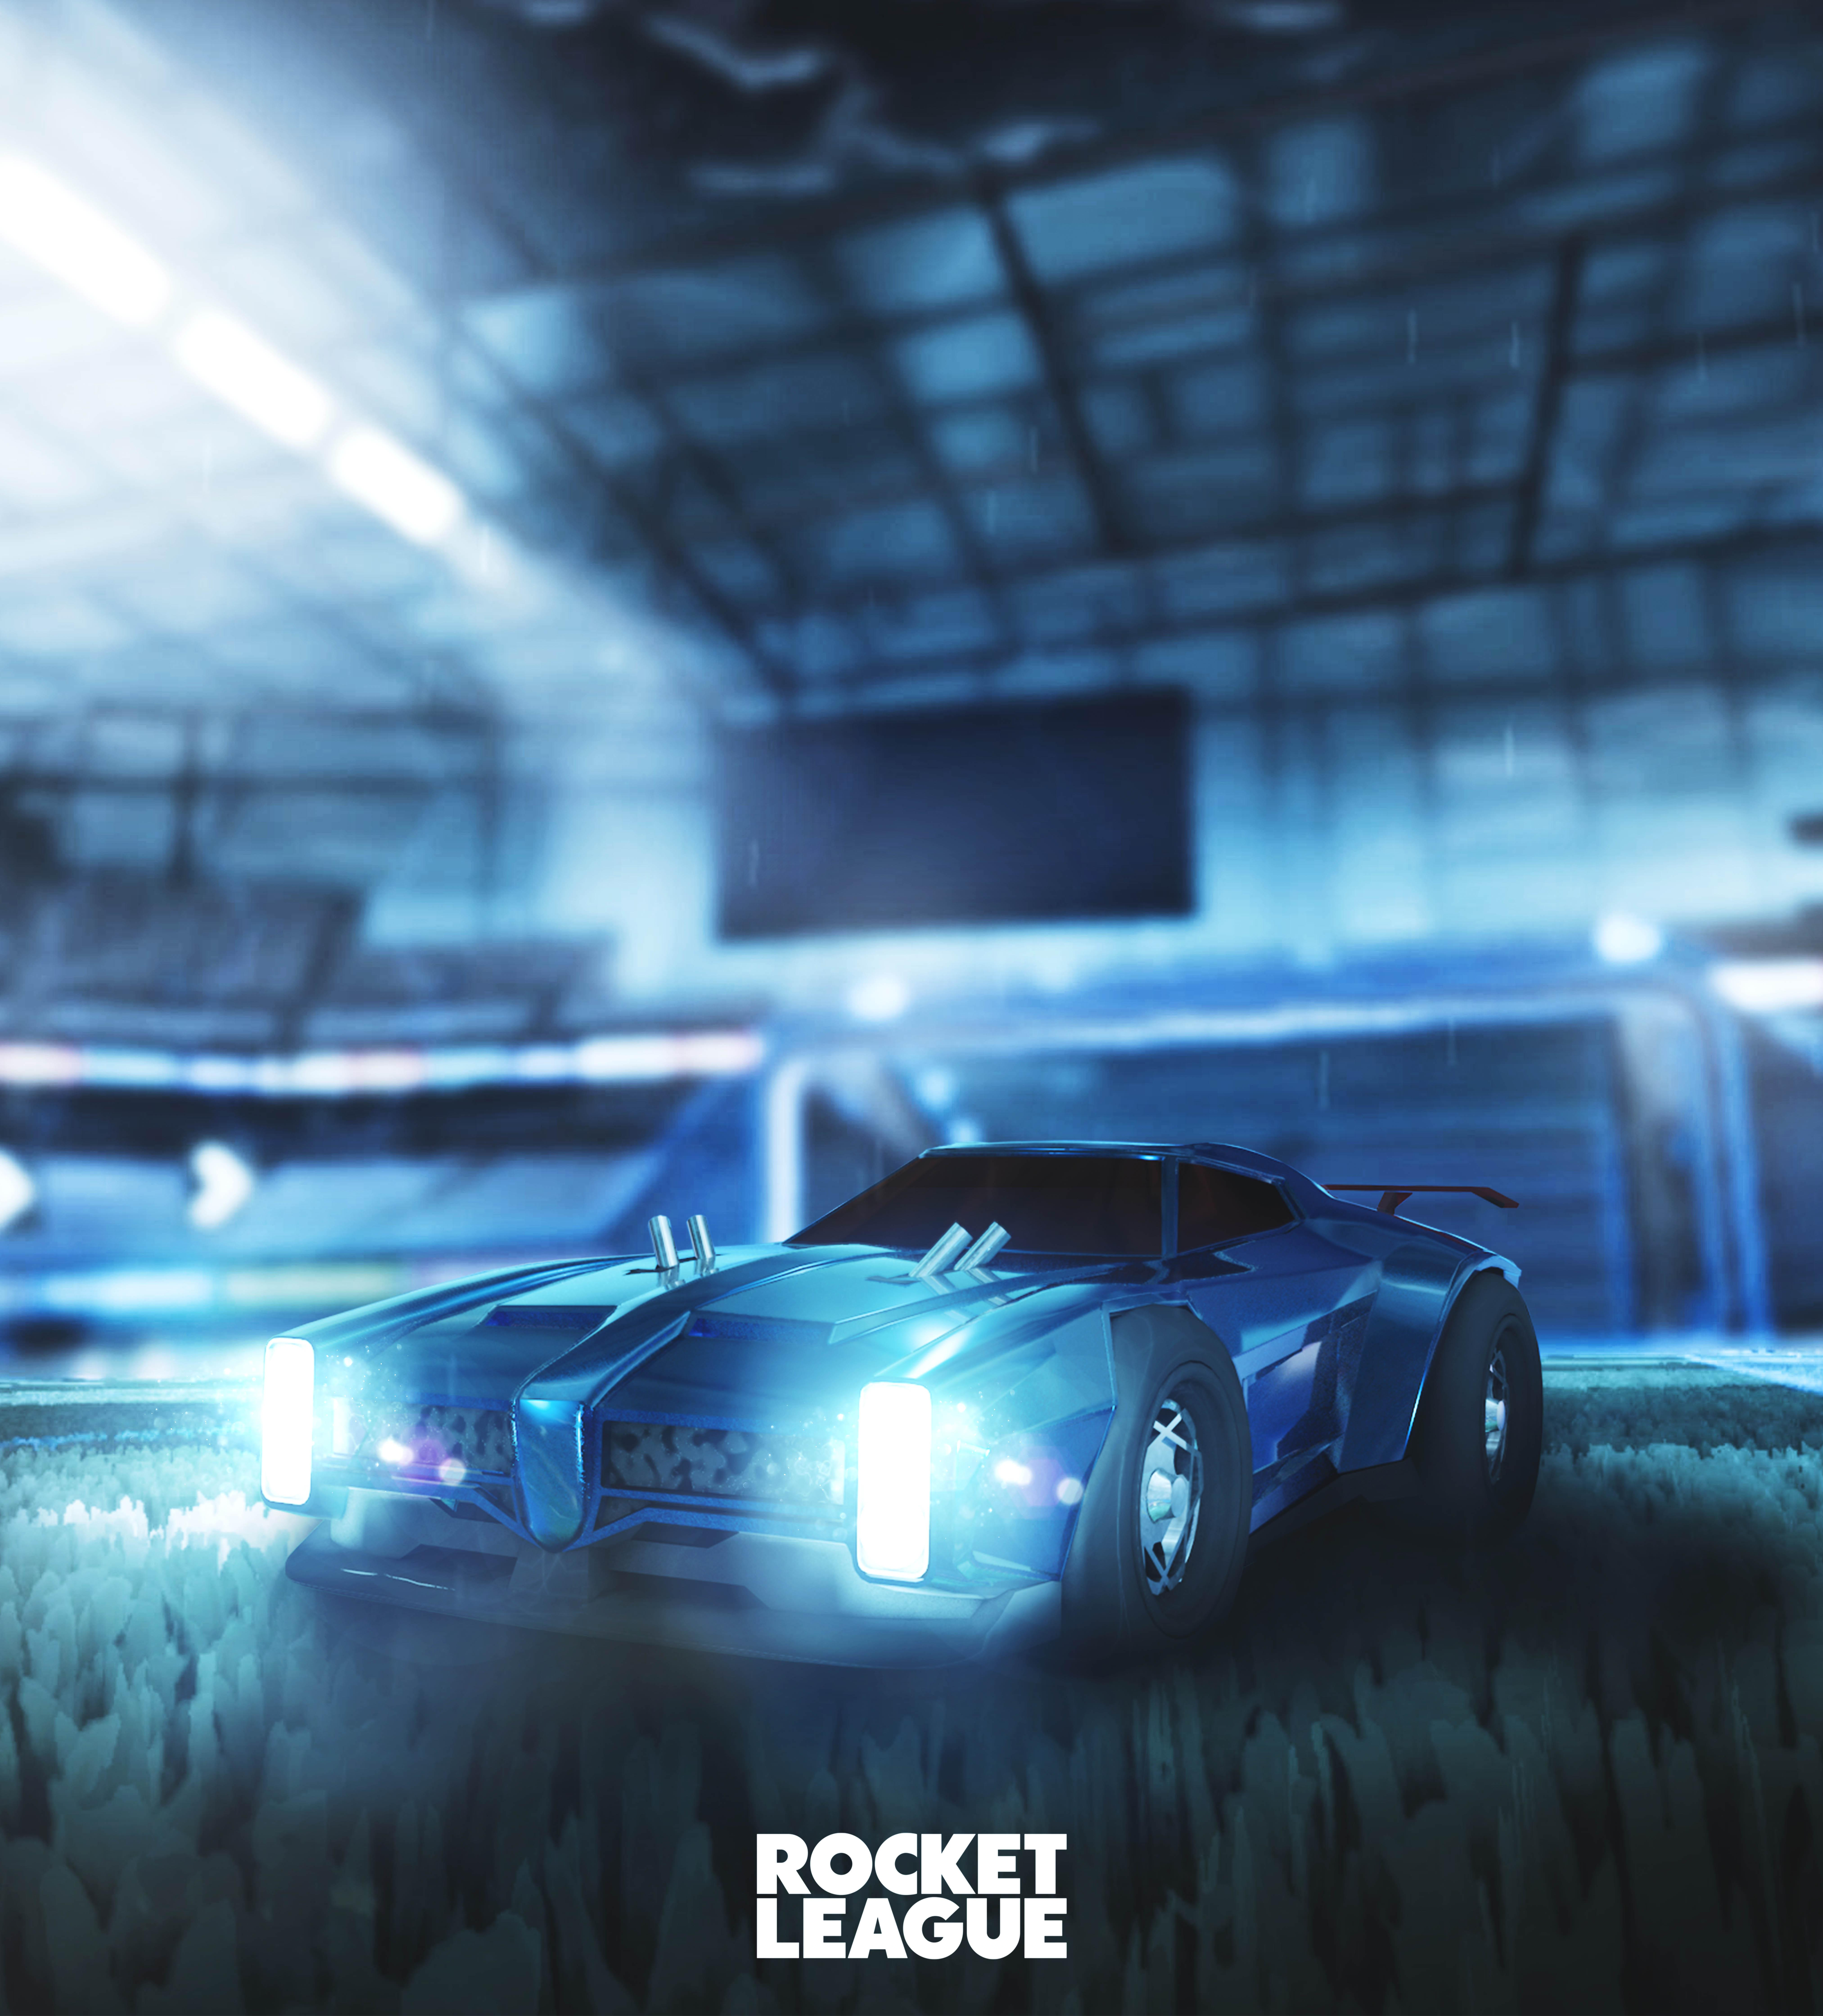 Made a second poster for Rocket League! 